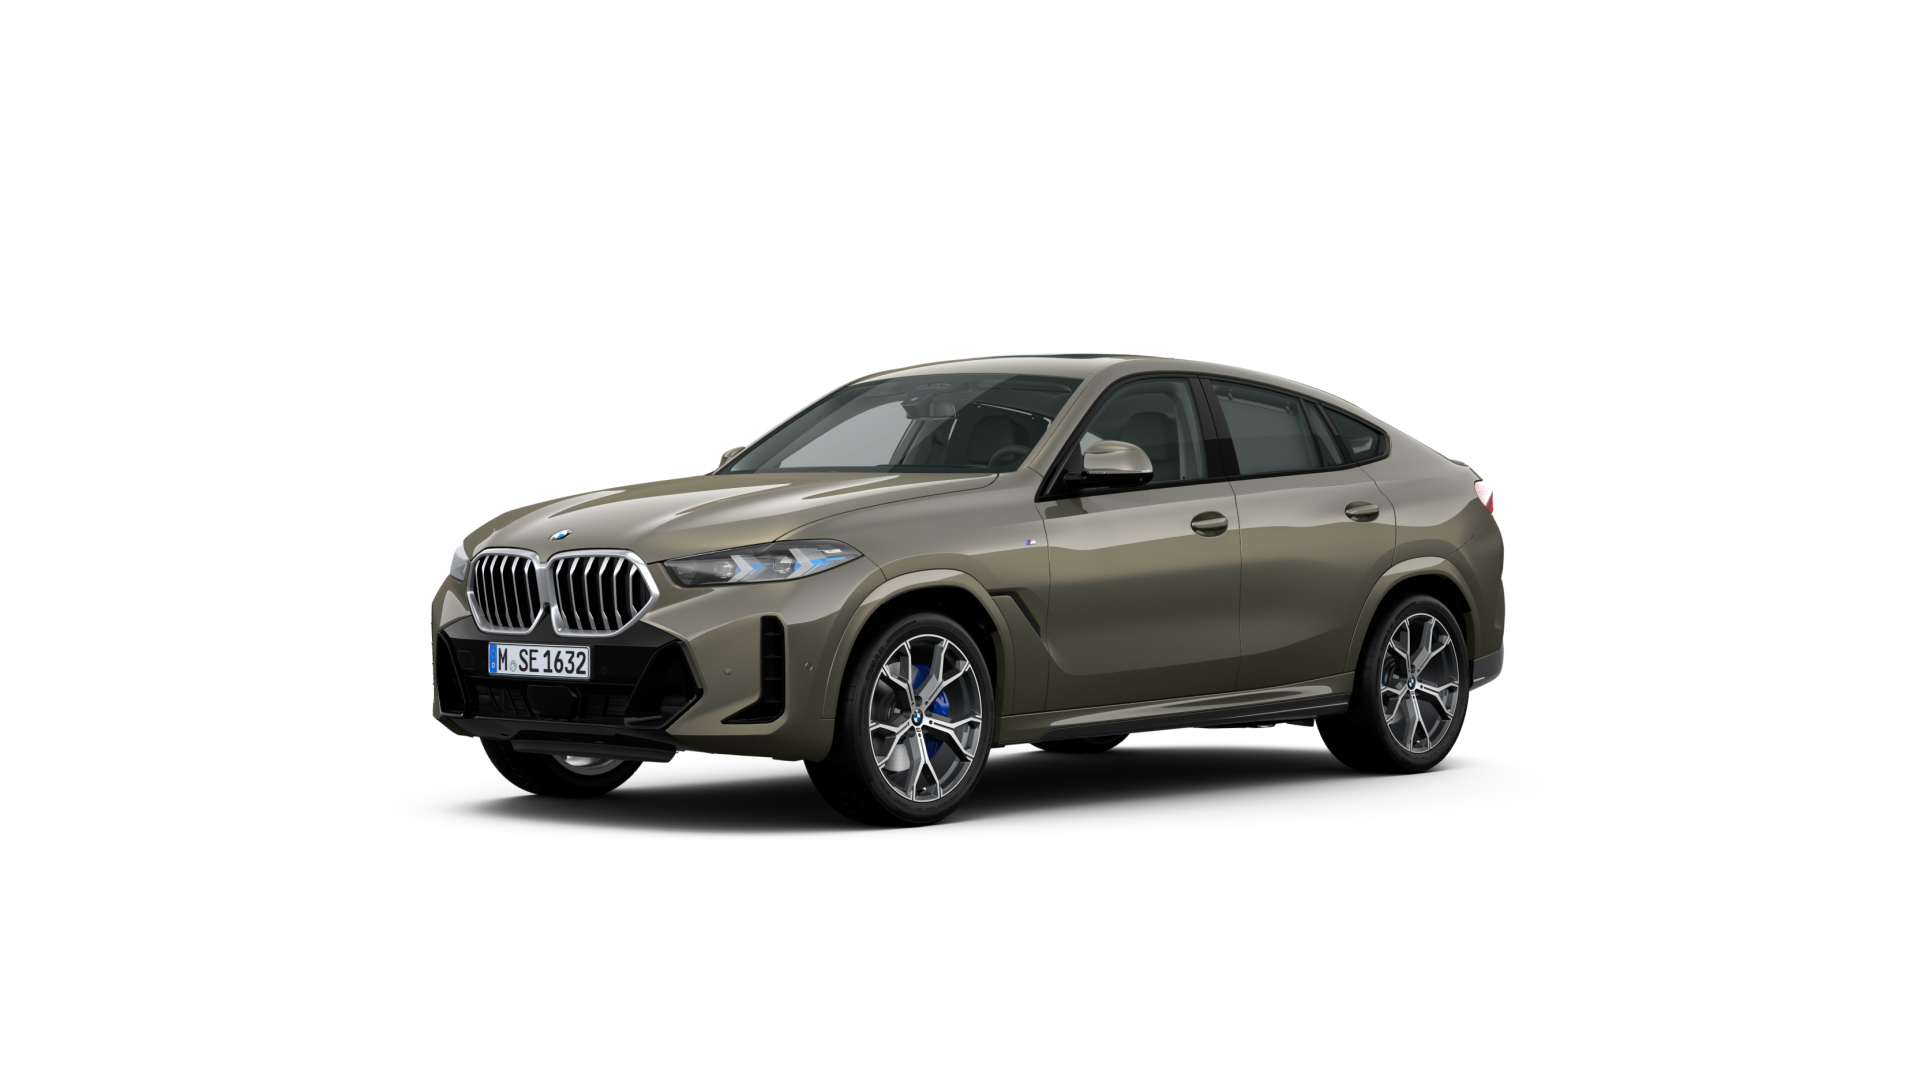 Bmw x6 xdrive40i m sport edition front side